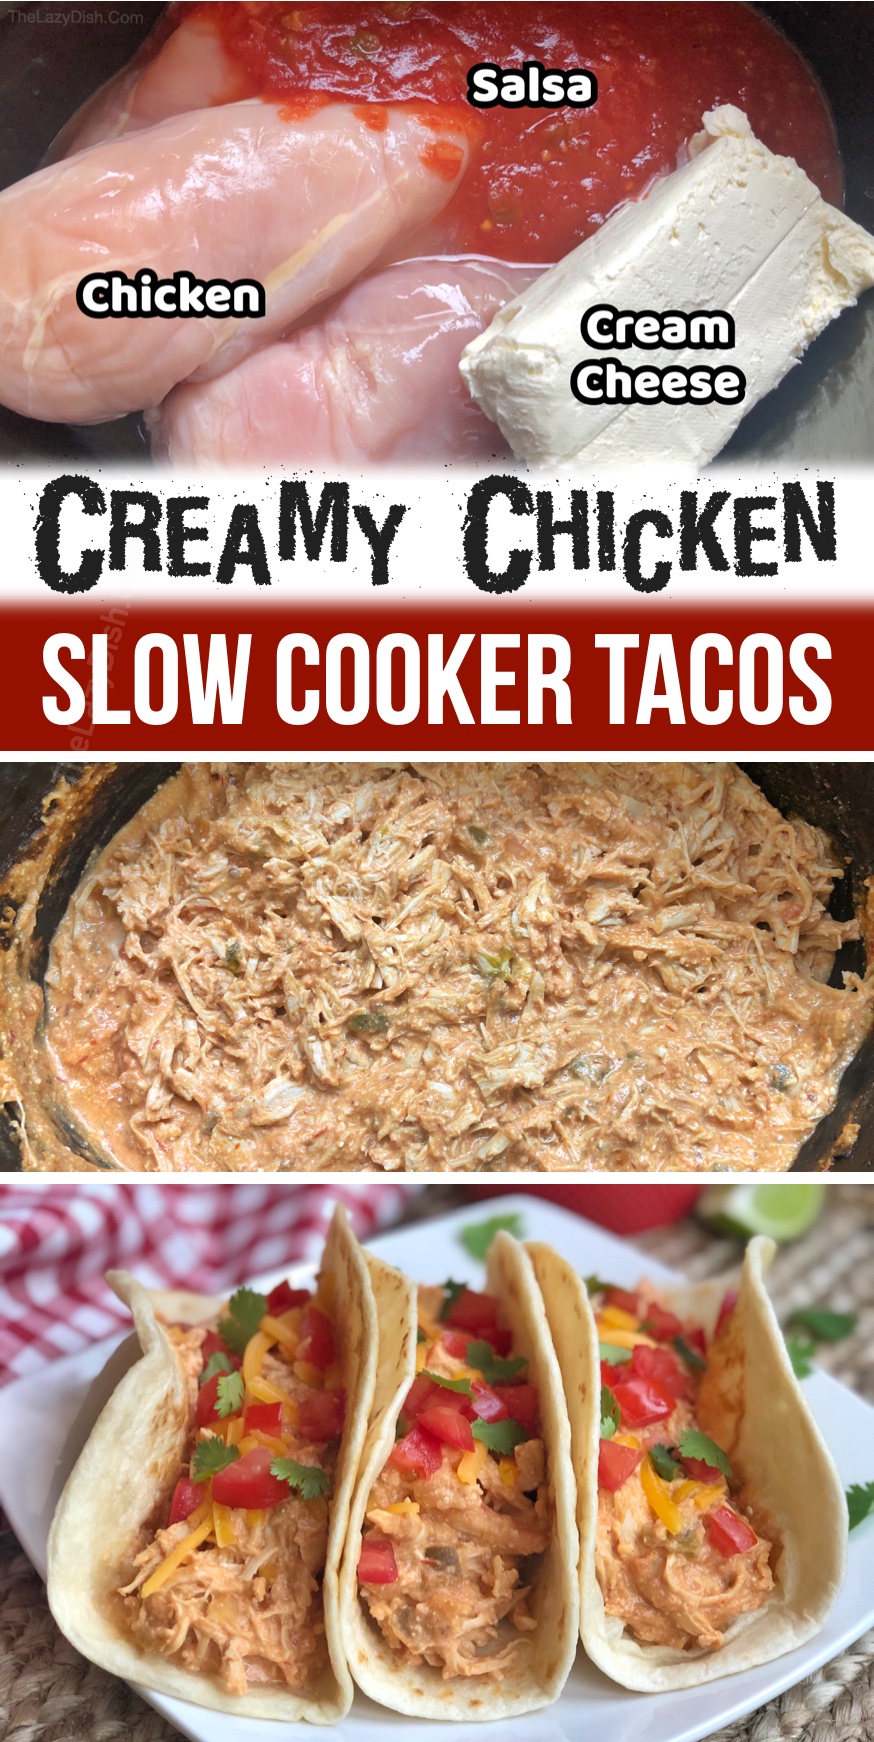 Yummy crockpot shredded chicken tacos made with cream cheese and a jar of salsa! This easy family meal is perfect for your picky eaters. Serve in warm flour tortillas with your favorite taco ingredients like lettuce, avocado, shredded cheddar, etc. I make this often on busy school nights when I'm too tired to cook. Just dump everything in your slow cooker!